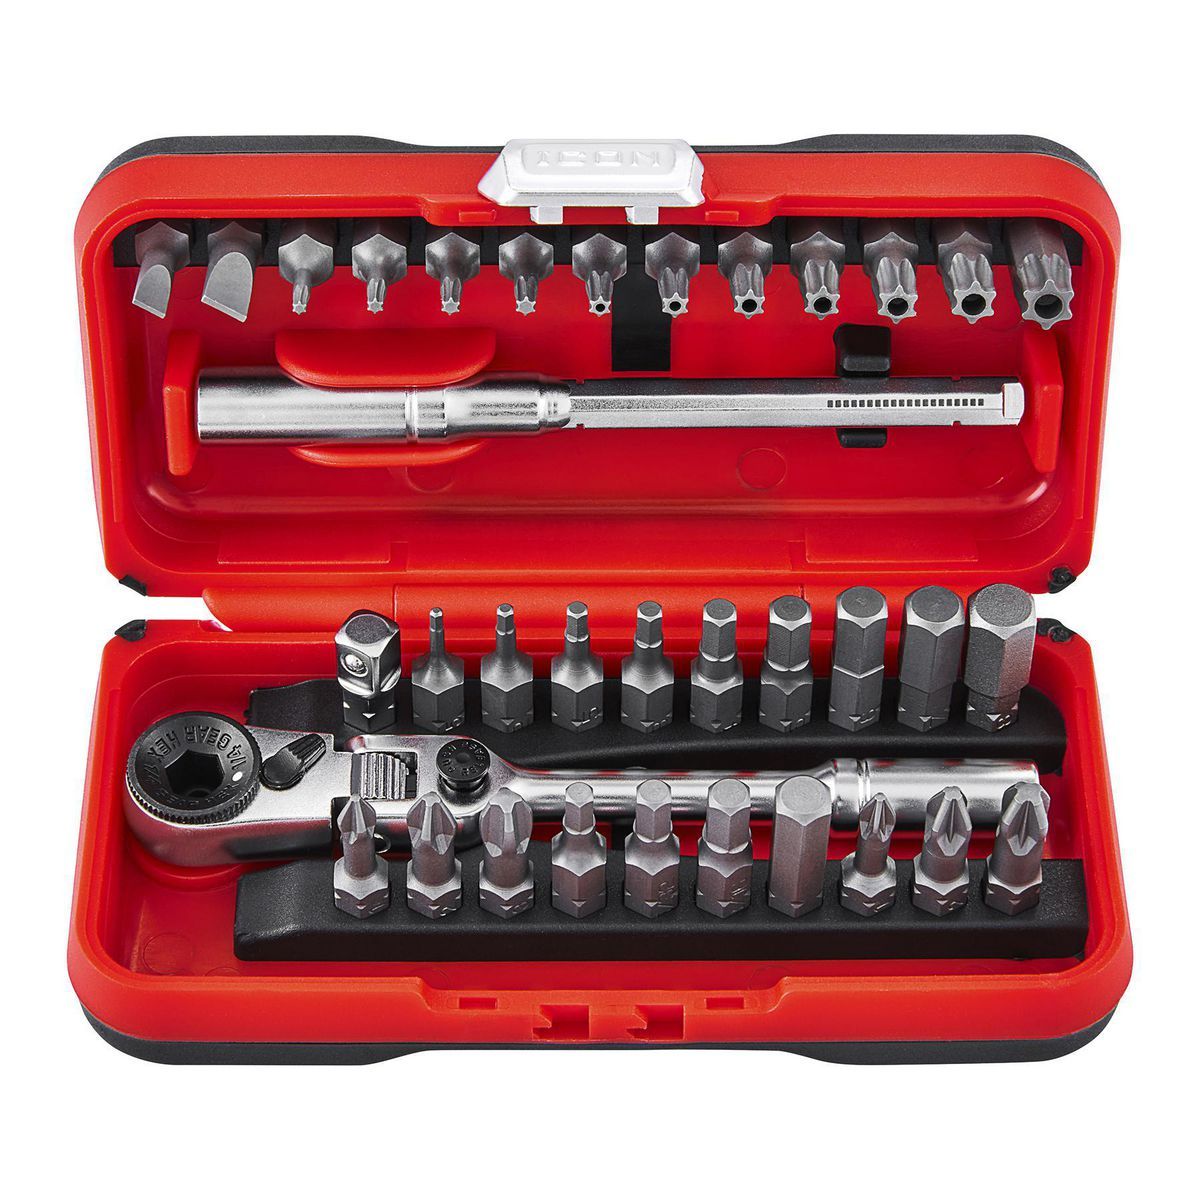 Coupons for ICON Locking Flex Head Ratchet and Bit Set – 35 Pc. – Item